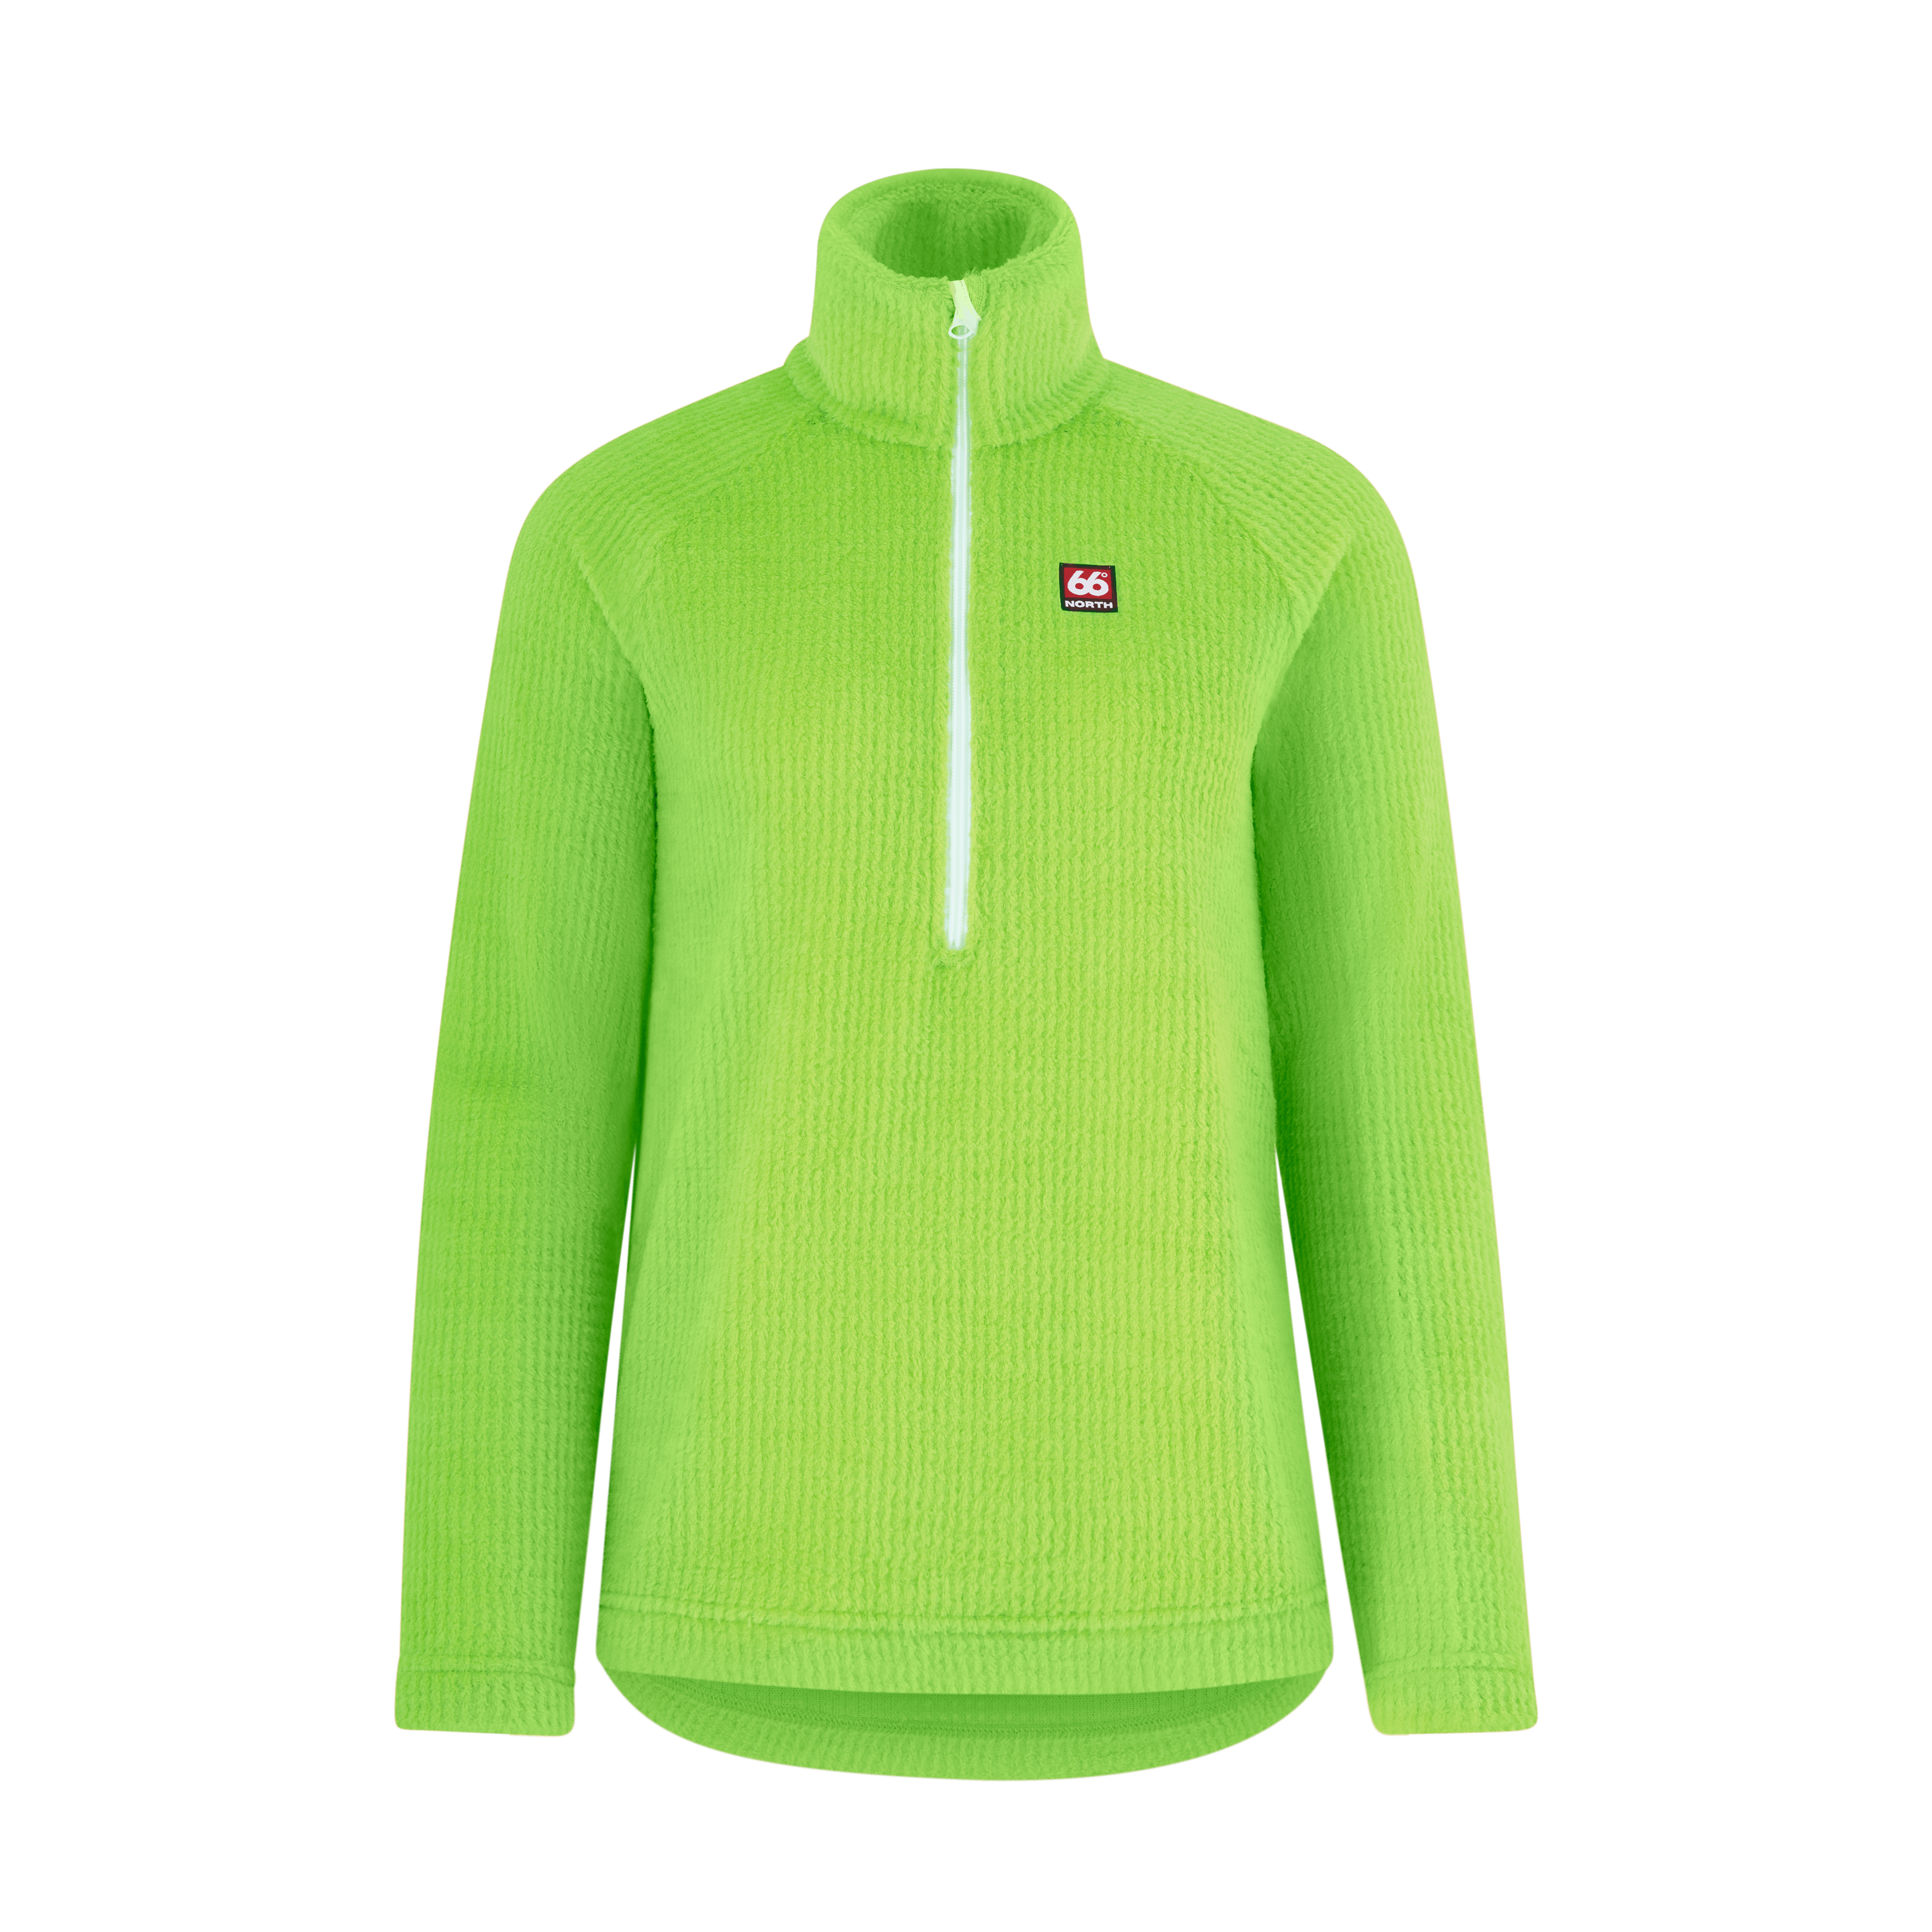 66 North Women's Hrannar Tops & Vests In New Spruce